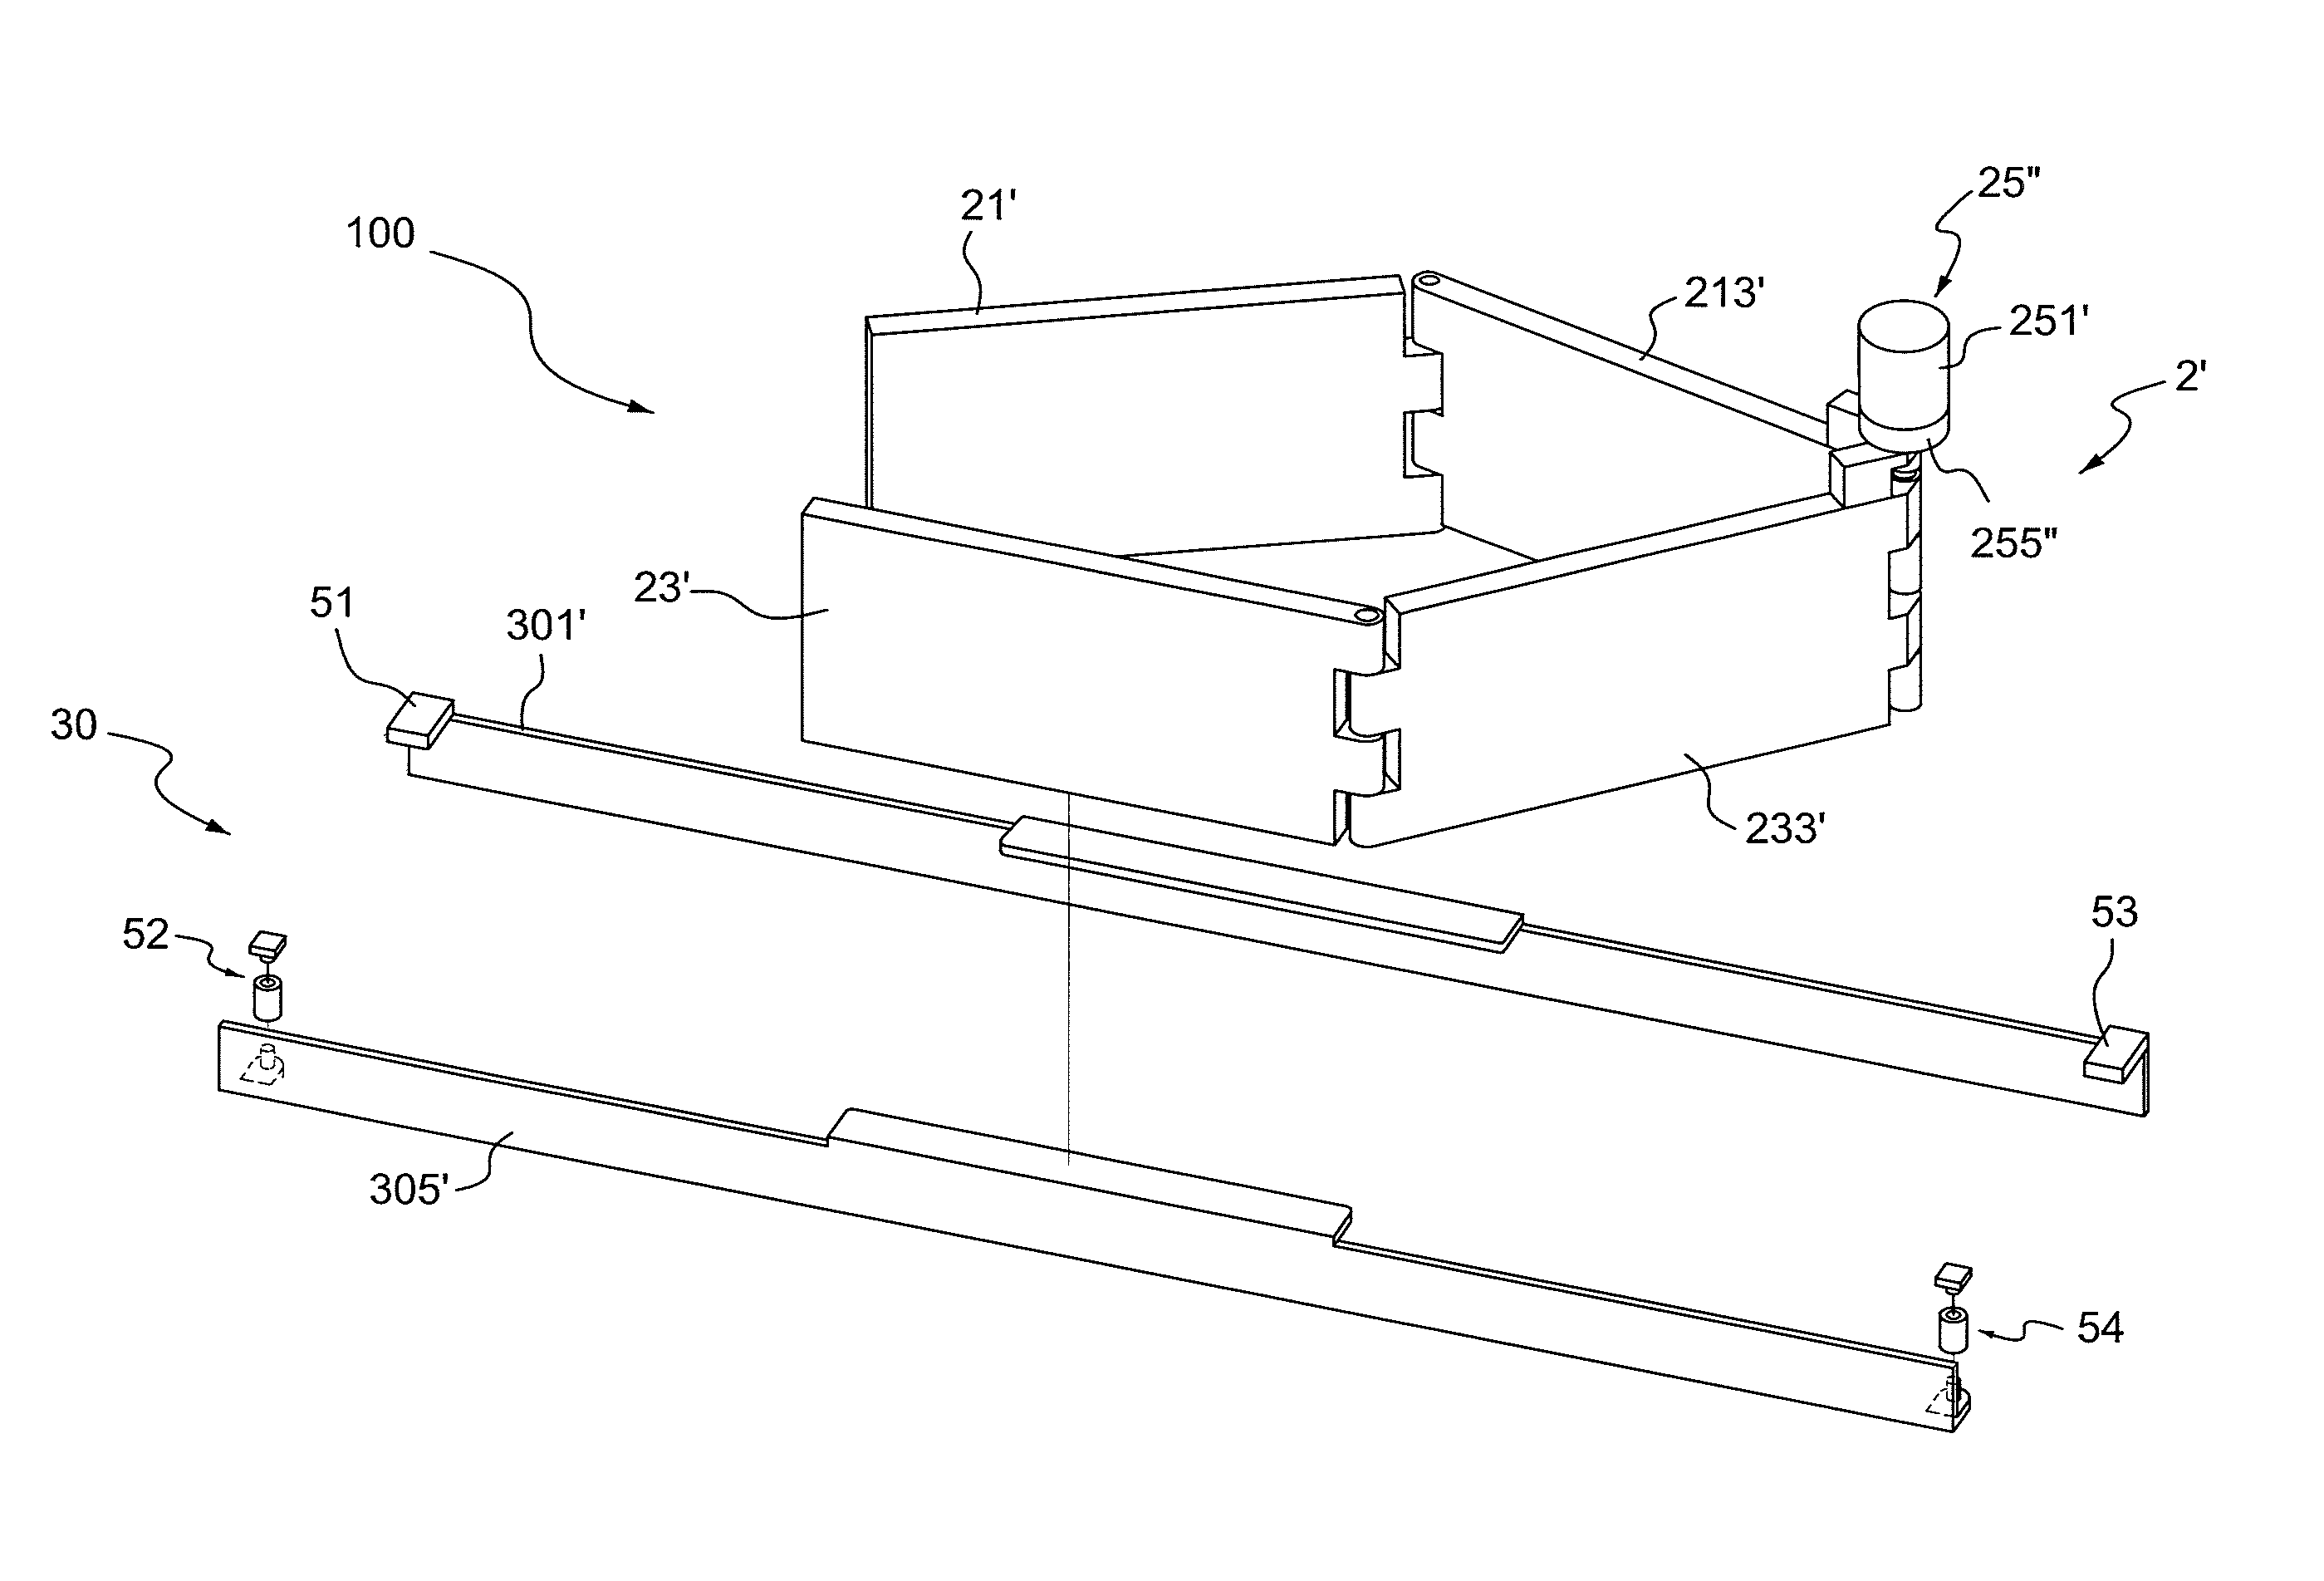 Flat panel display remote-controlled viewing angle adjustment system